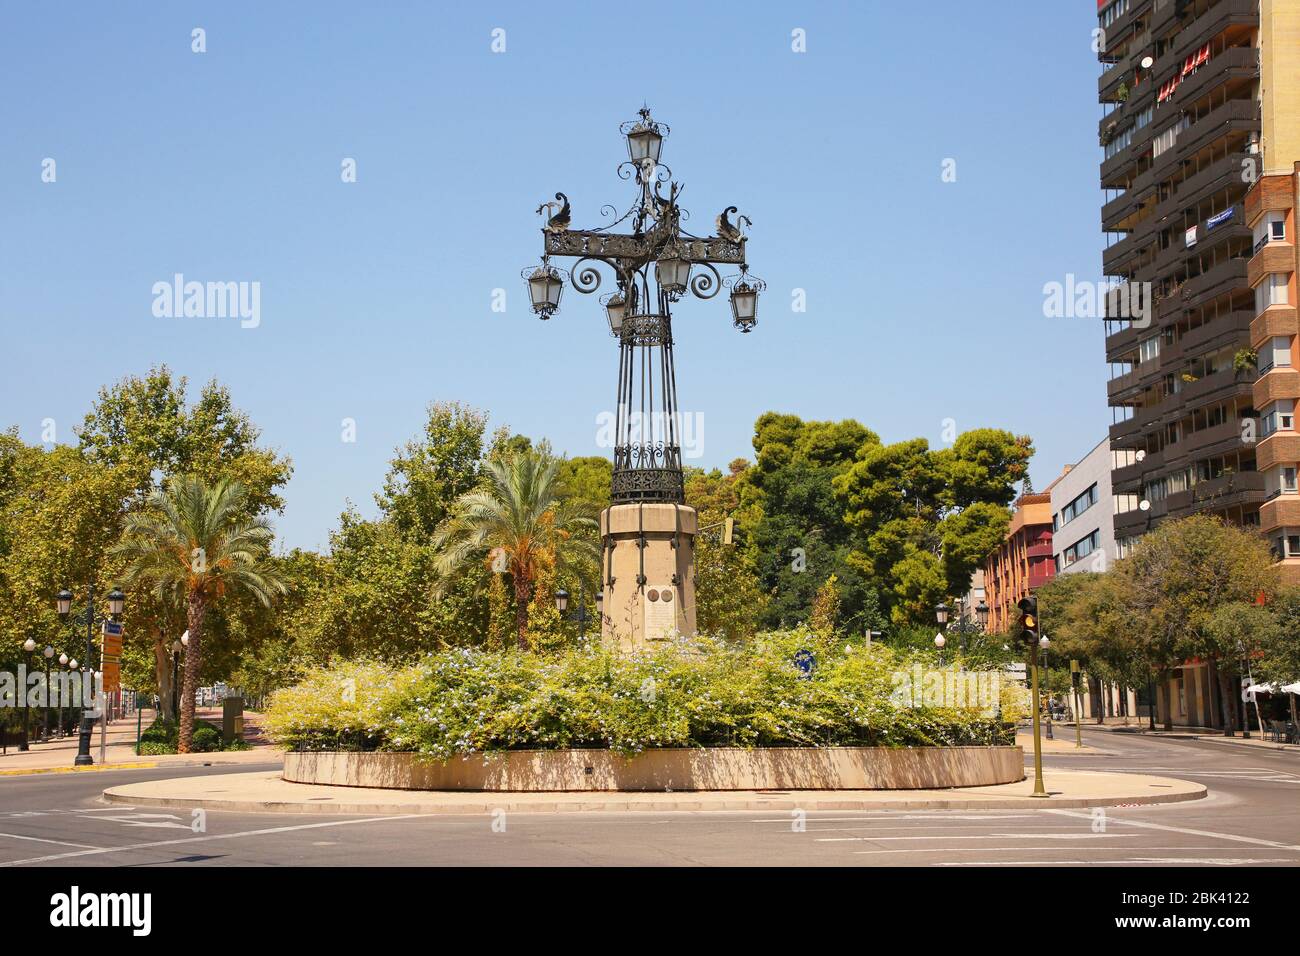 One of the city’s emblems is this intricately designed street lamp, La Farola. It was created in 1929, Castellon de la Plana, Valencia Province, Spain Stock Photo